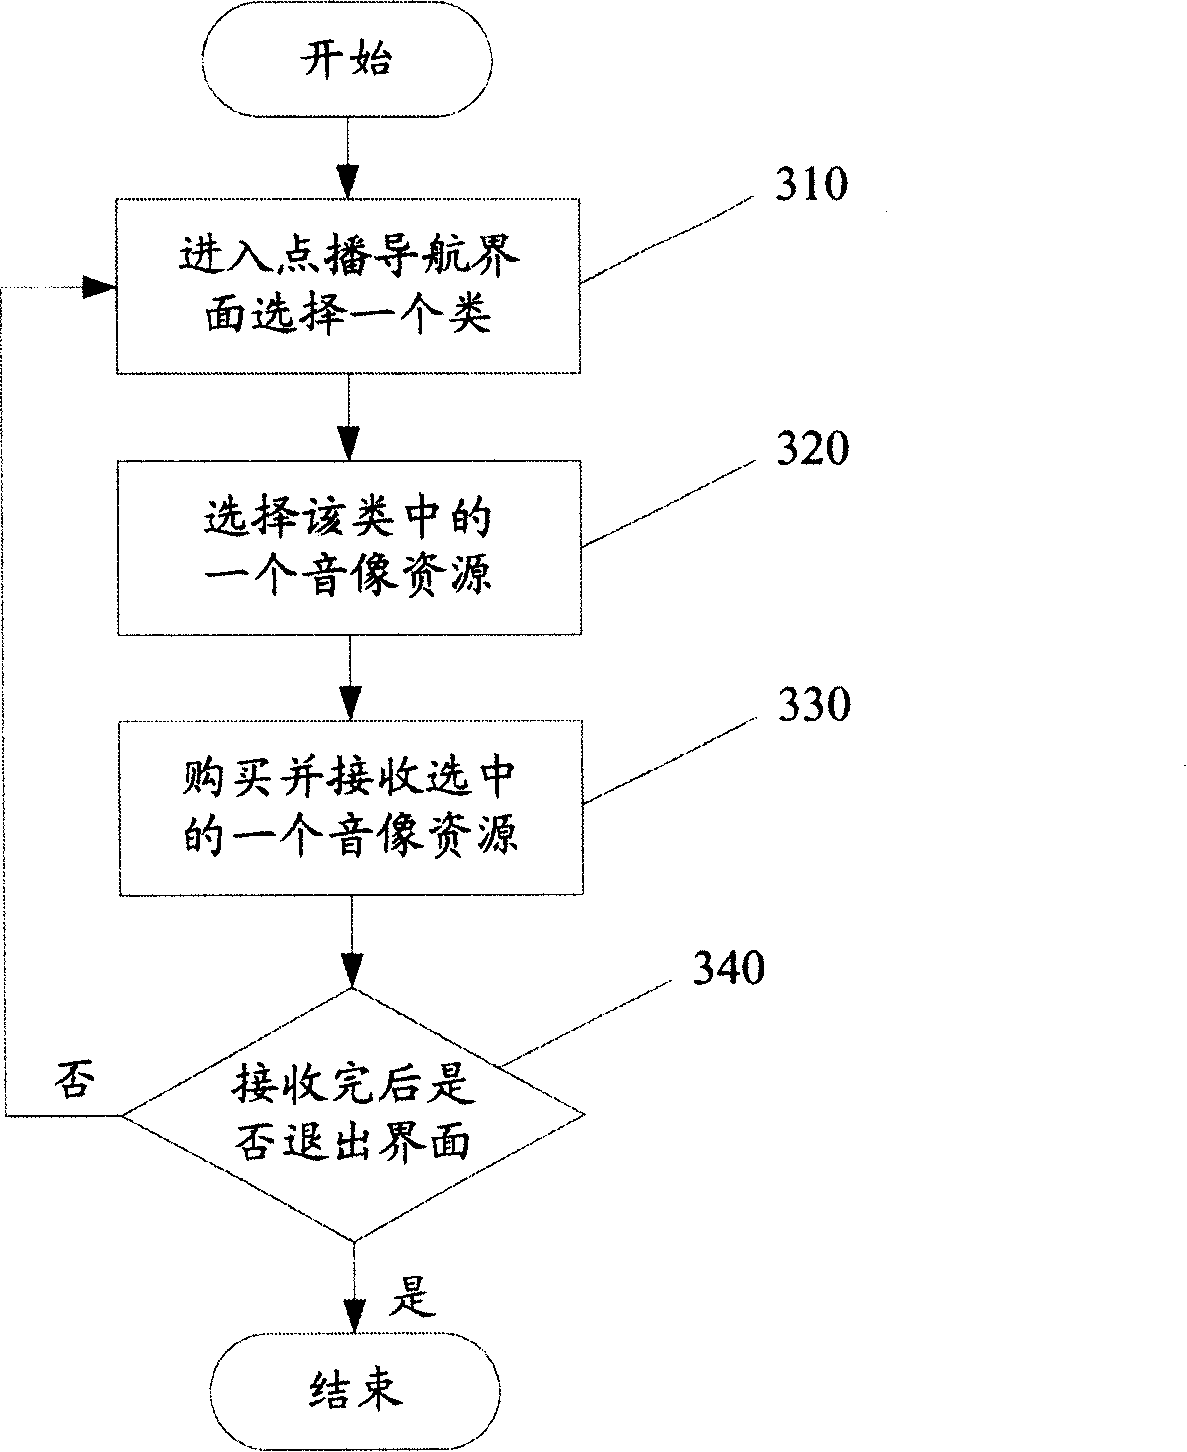 Method and system for optimizing audio and video resource metadata in network television